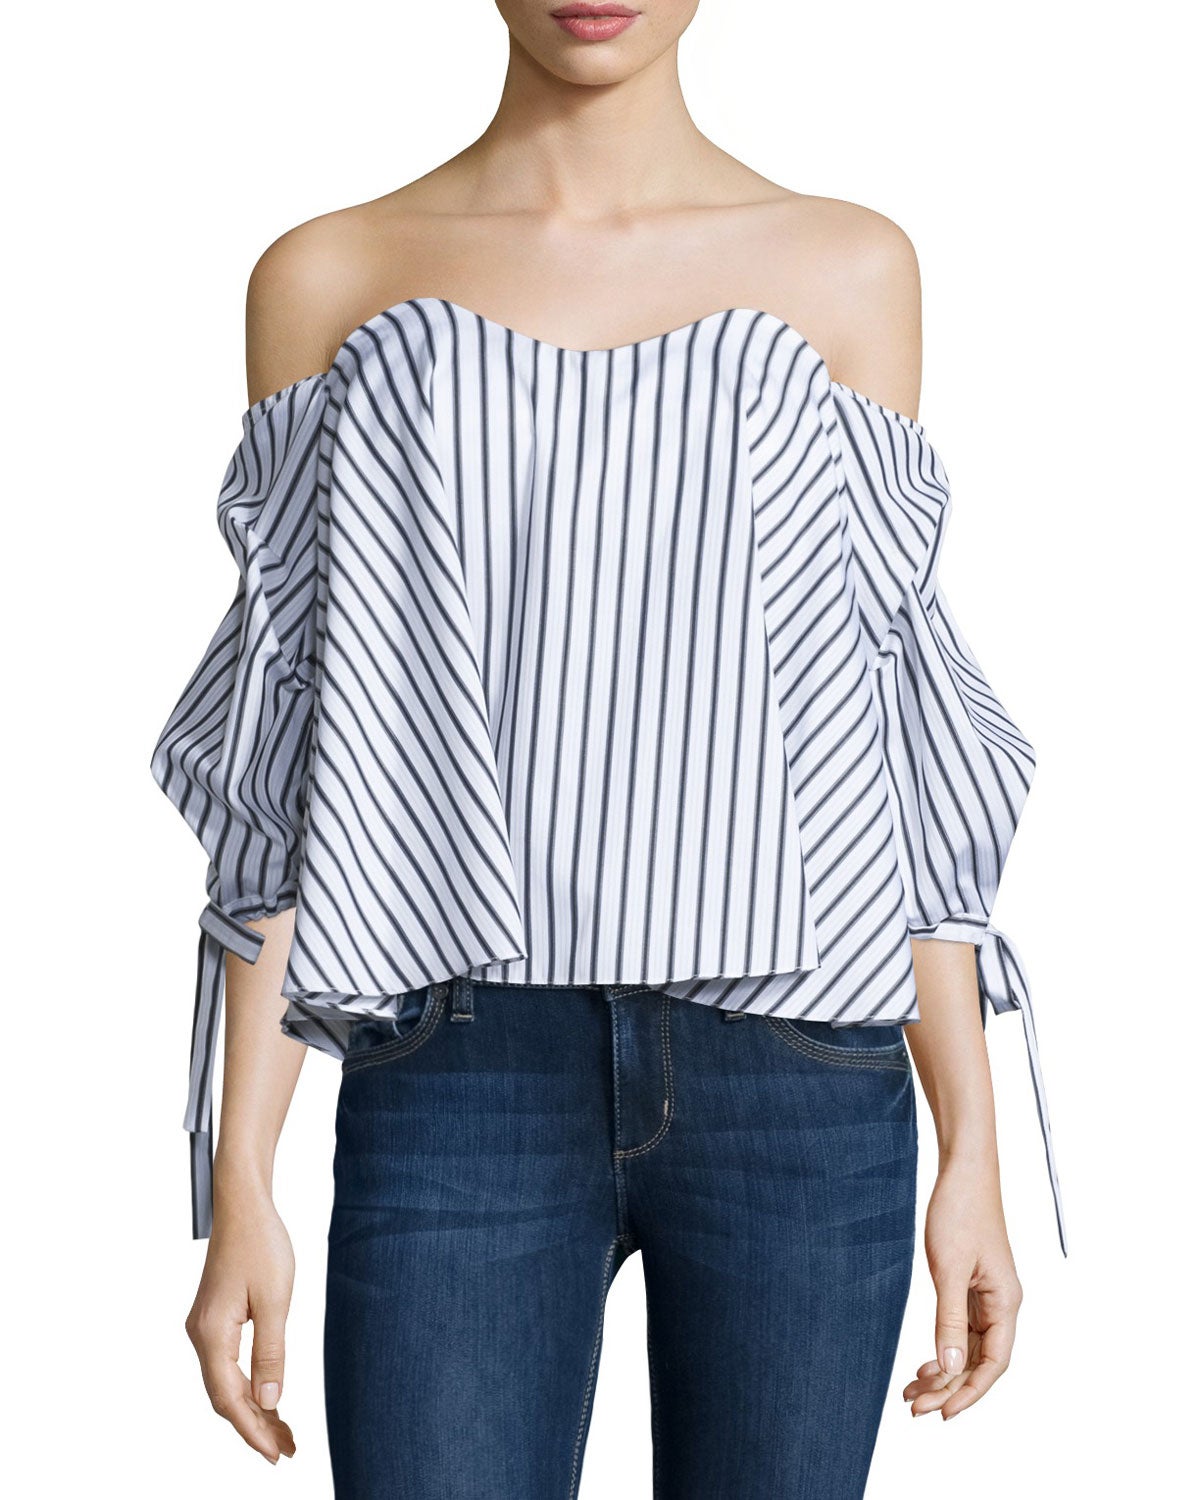 One Trend, Three Ways: Show Some Skin in an Off-The-Shoulder Top This ...